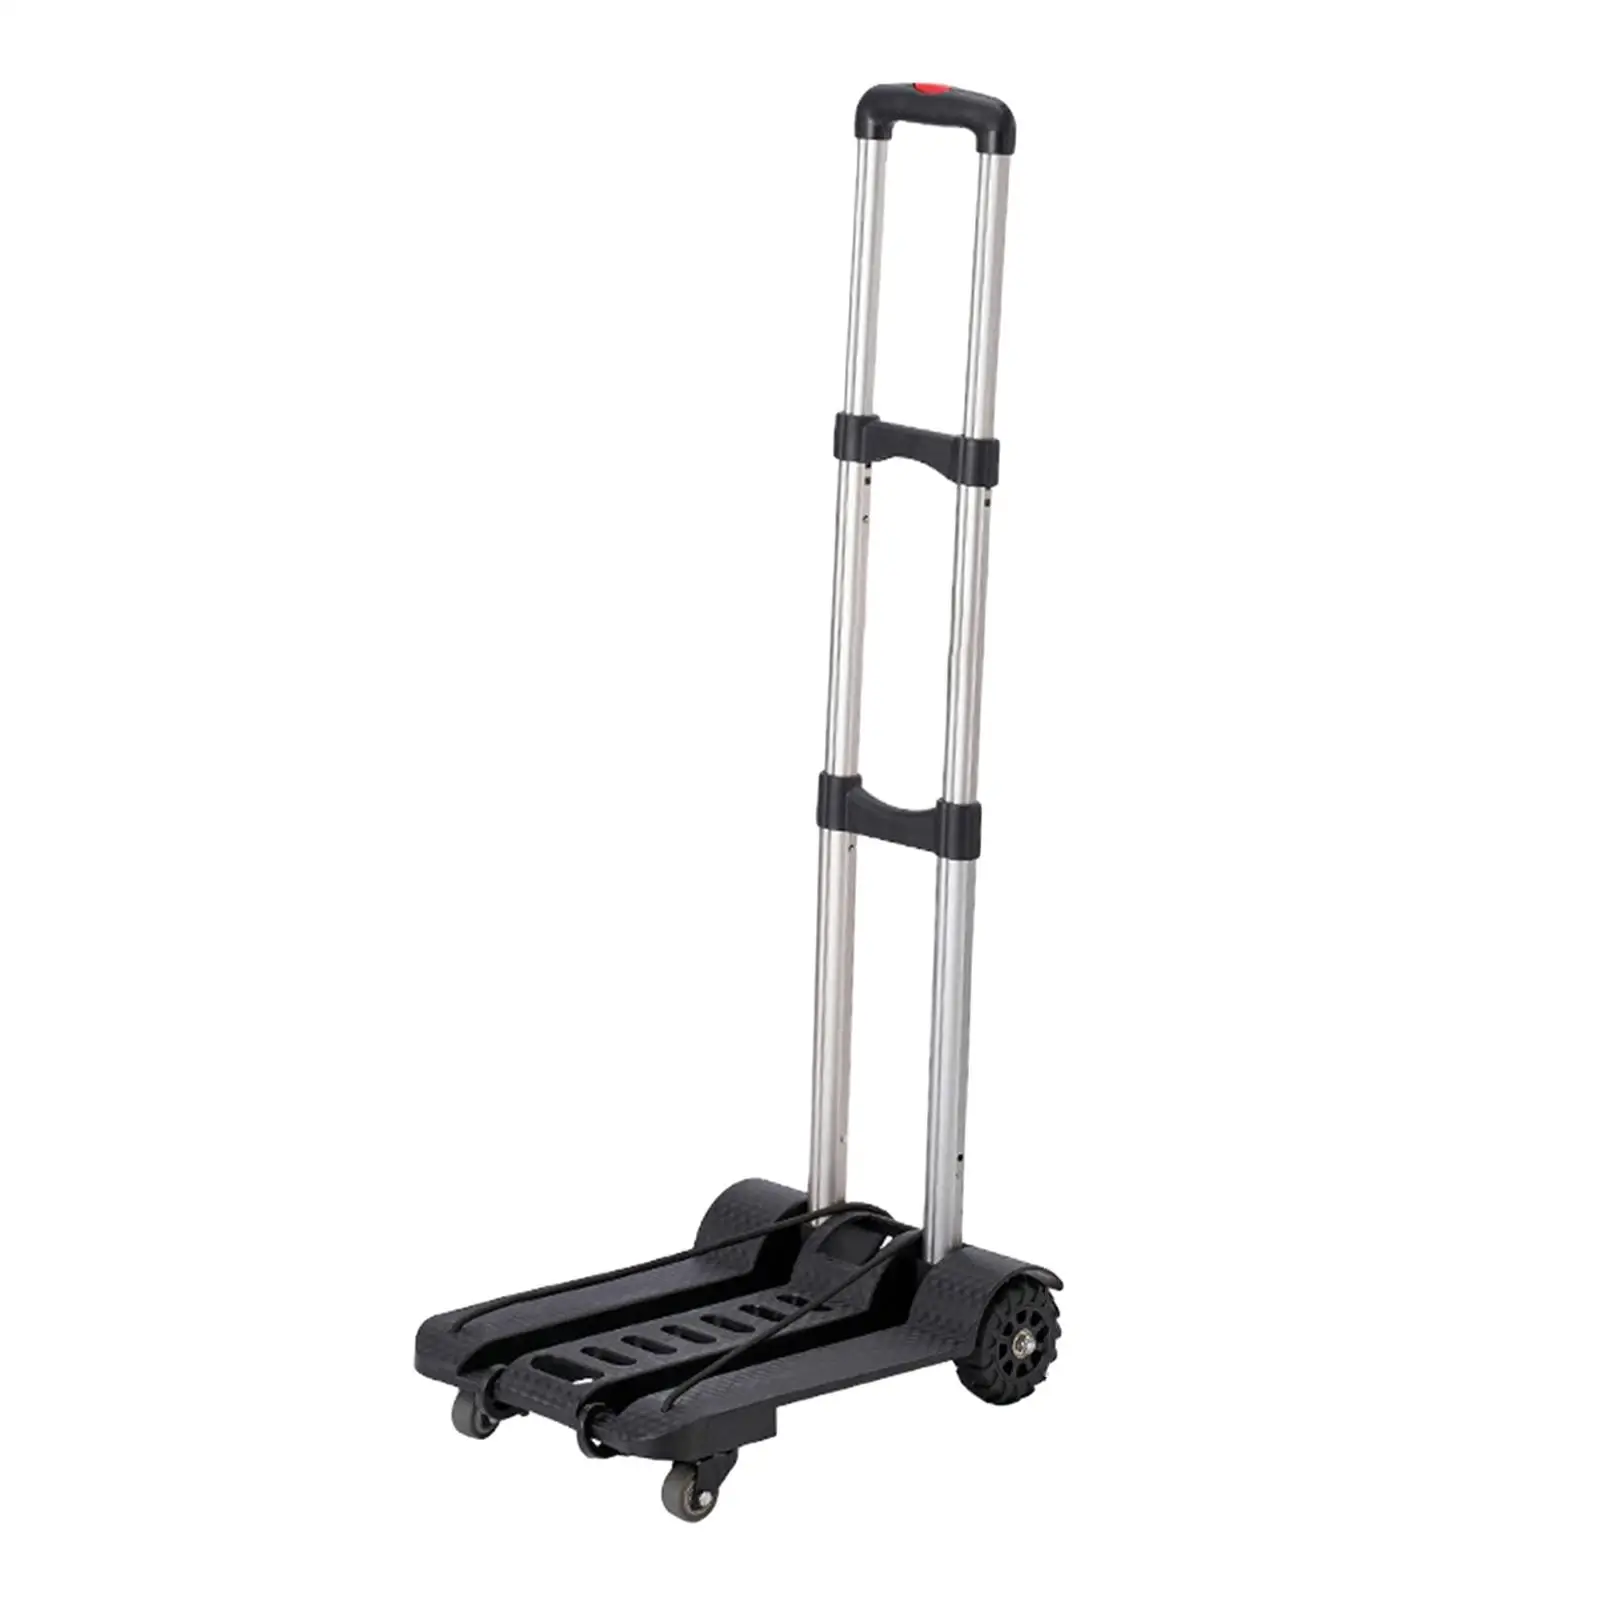 Folding Hand Truck Cart Travel Telescoping Handle Moving Luggage Trolley